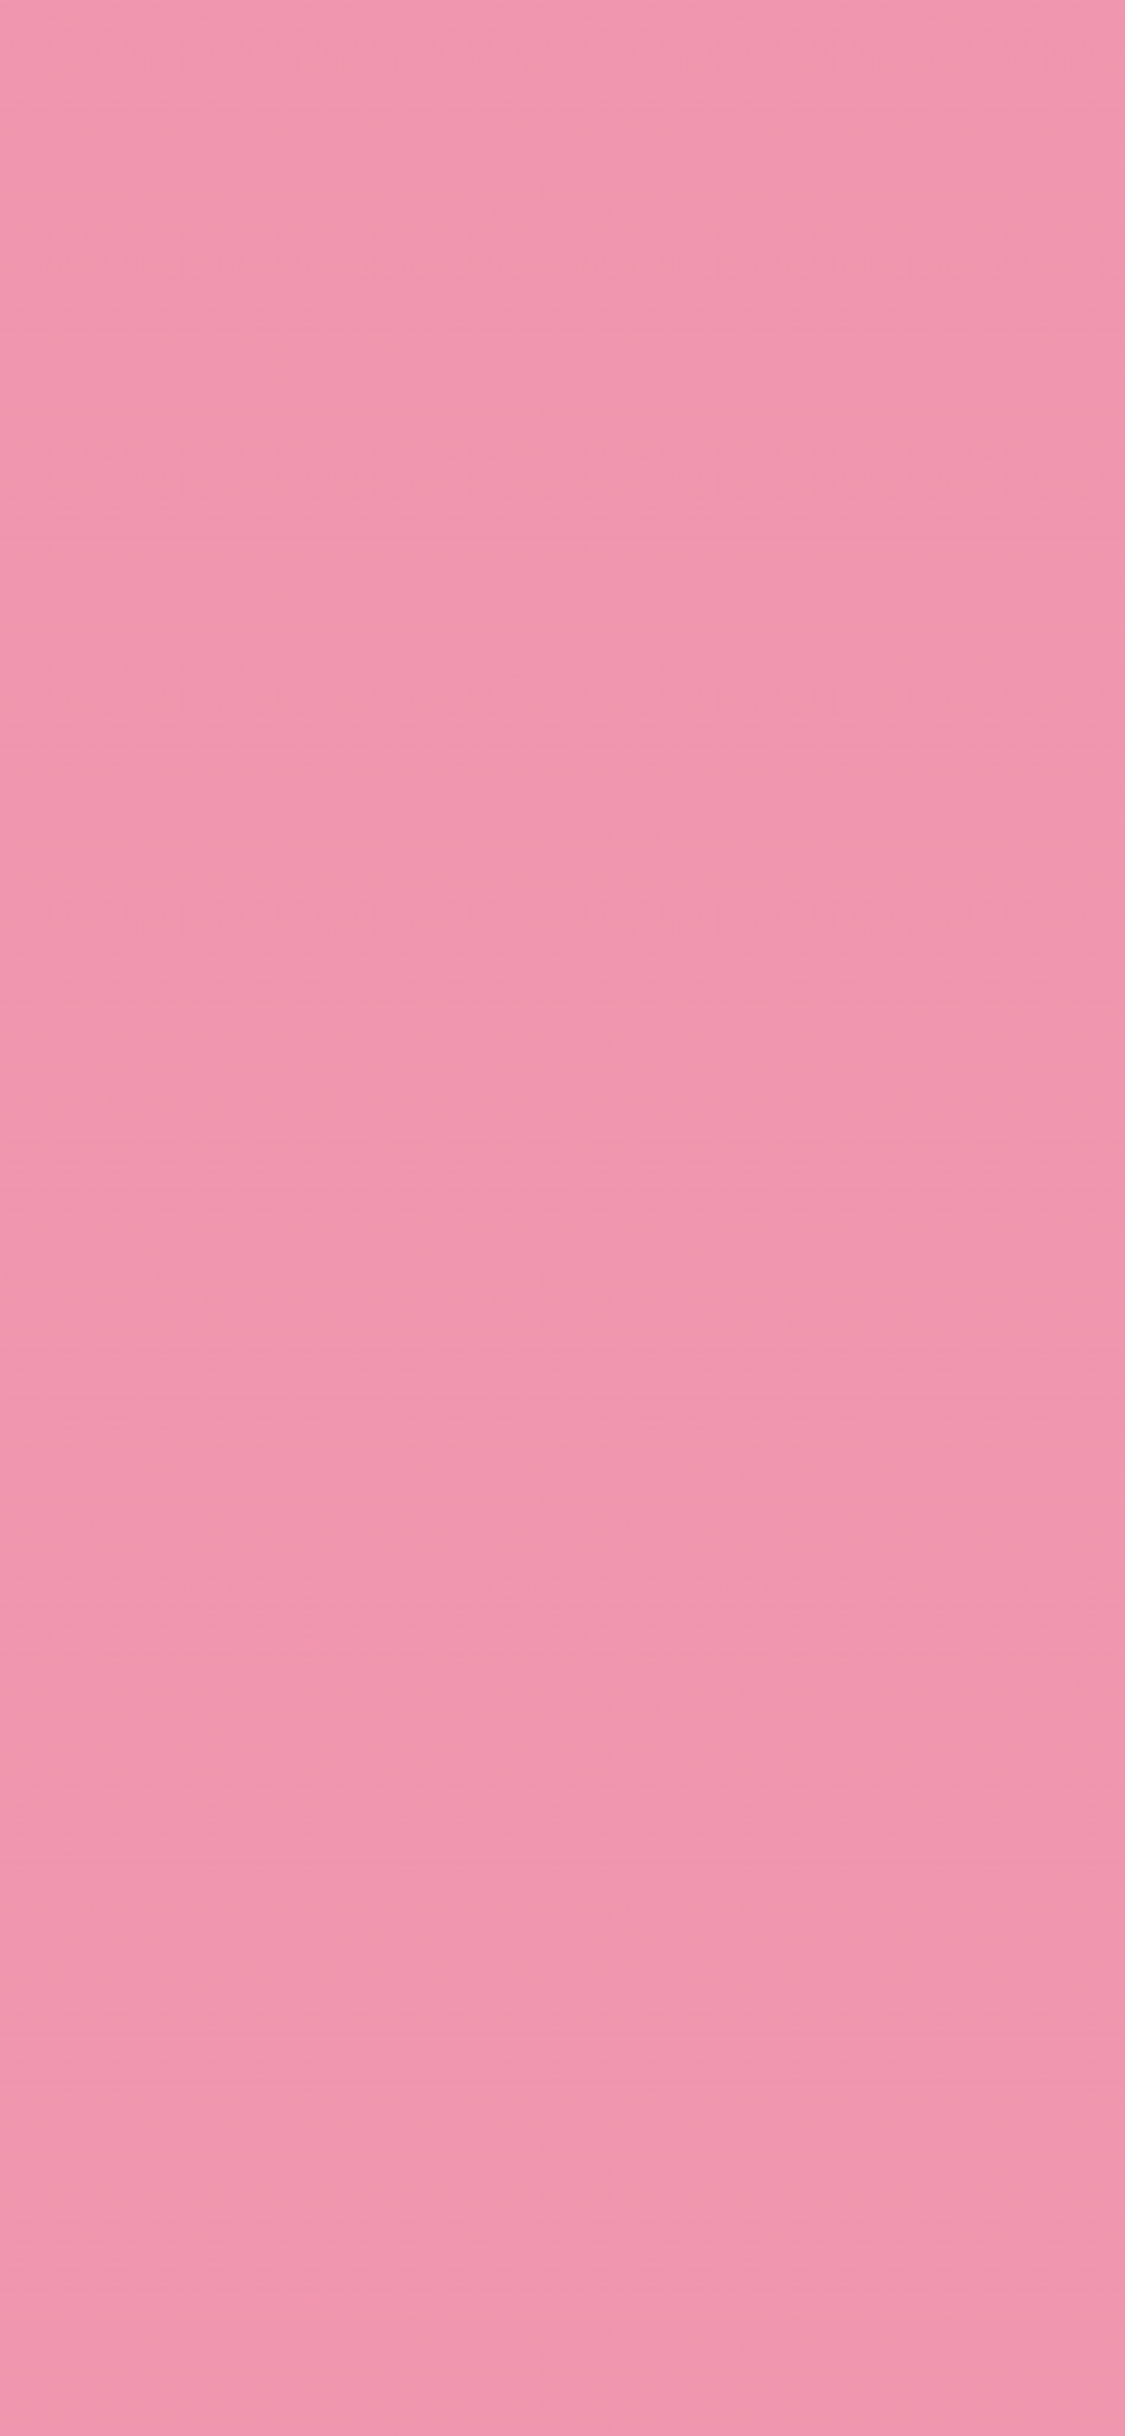 Aggregate more than 55 plain pink wallpaper latest  incdgdbentre